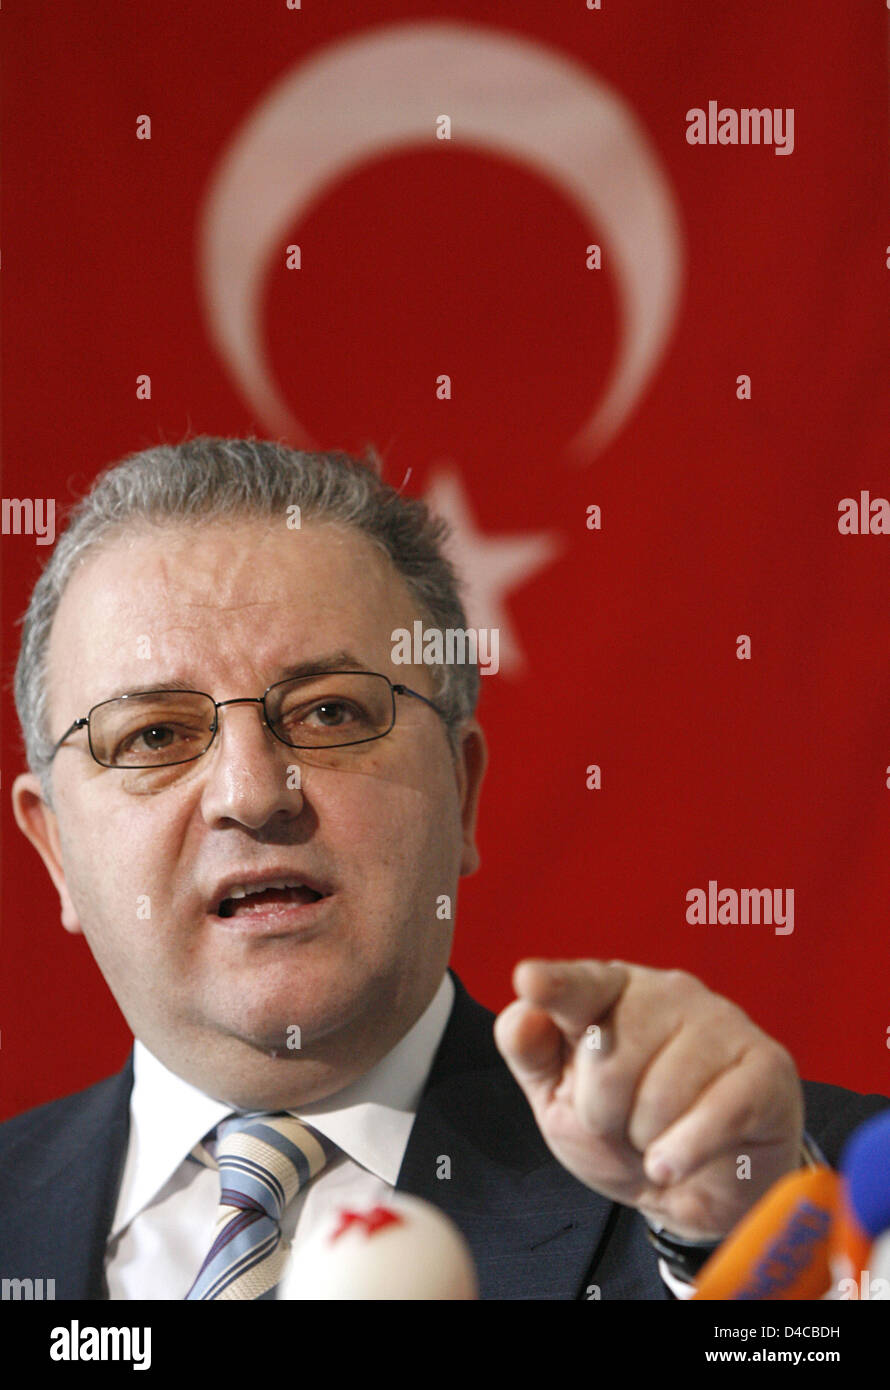 The picture shows Kenan Kolat the chairman of the intrest group Turkish community in Germany (TGD) at a press conference in Berlin, Germany, 10 January 2007. The TGD appealed to the German President to intervene in the heated debate about crime commited by young people in Germany and to help turn the heated debate into a rational discourse. TGD supports the intrests of Germans with Stock Photo